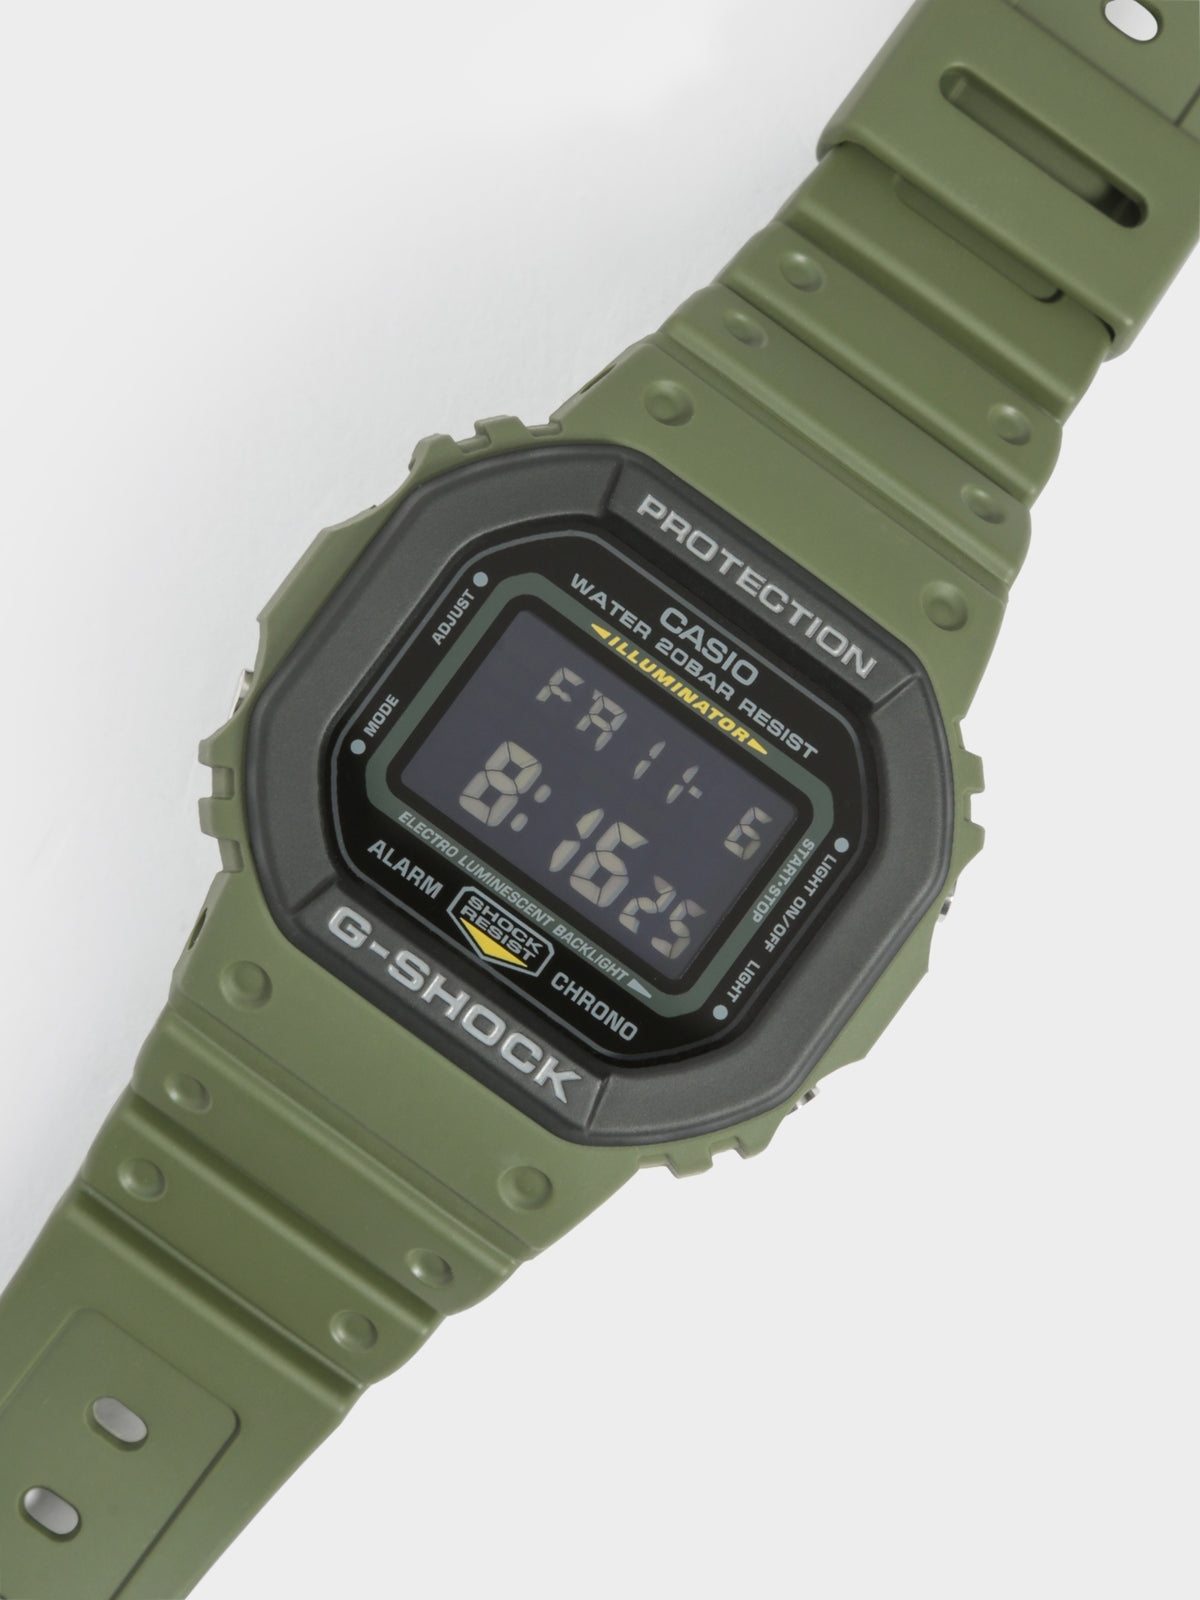 Square face DW-5600 Watch in Khaki